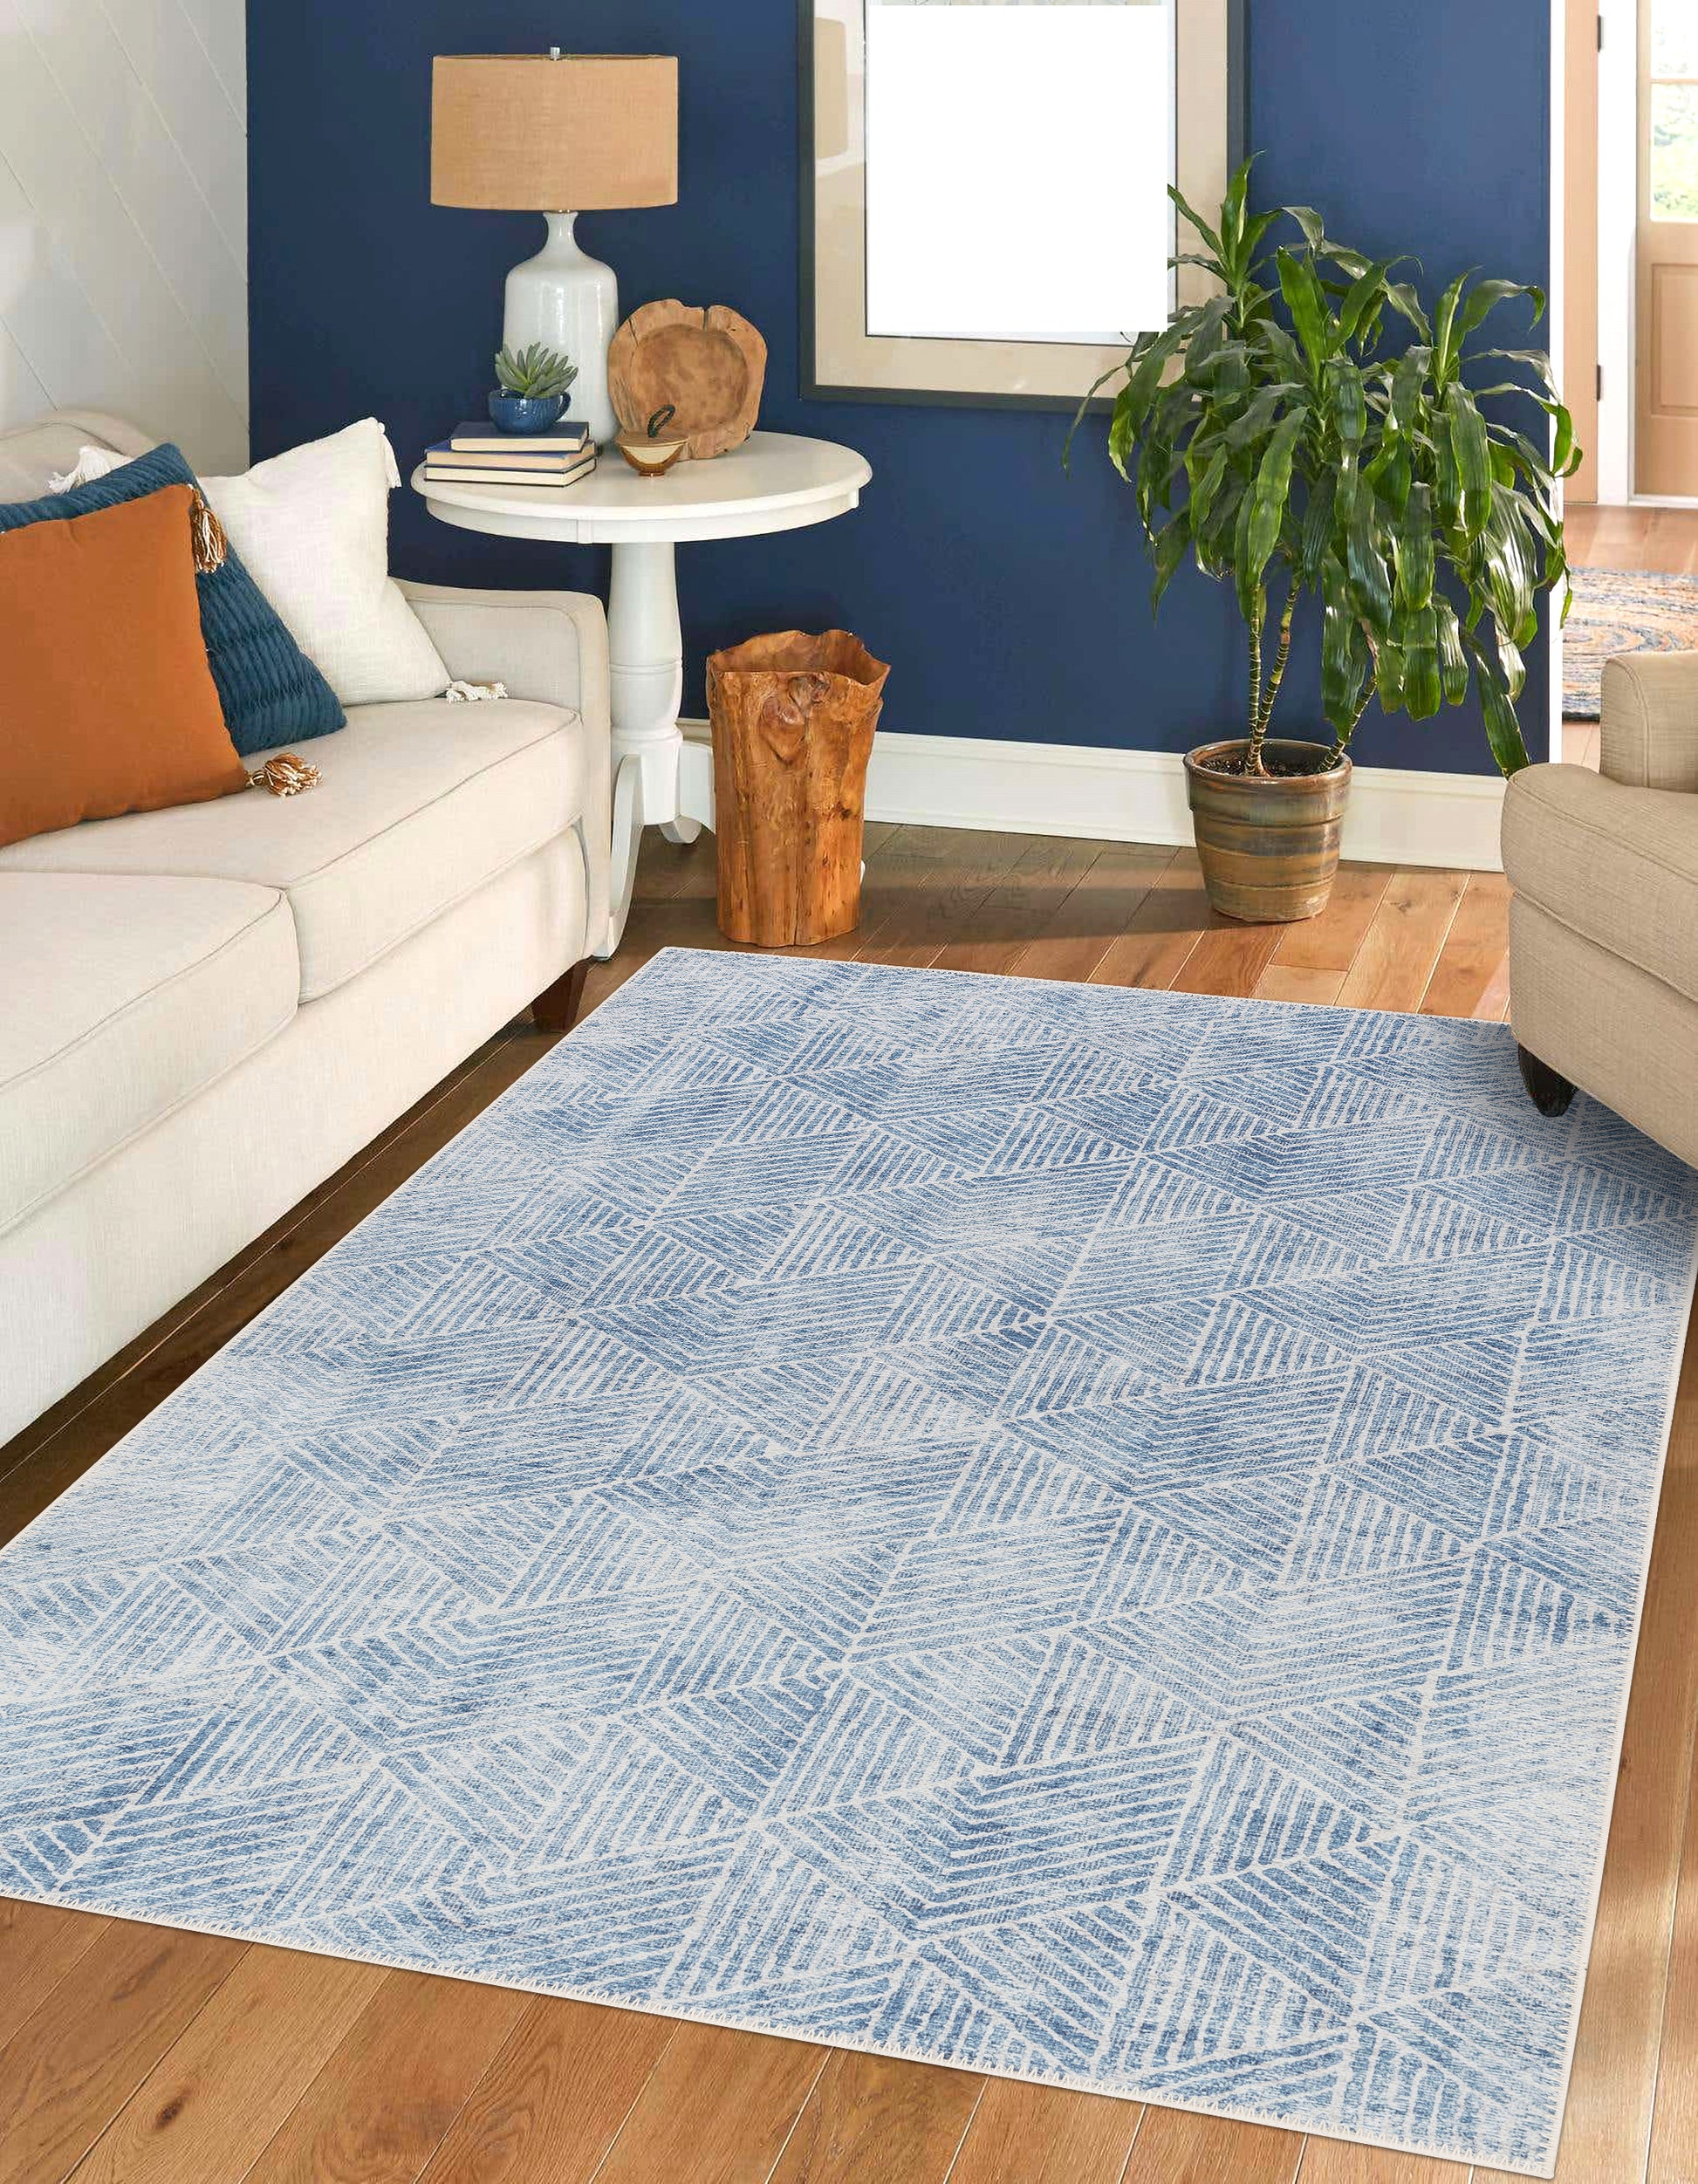 SELENE Spill-Proof Machine Washable Blue White Distressed Indoor Area Rug, washable runner rug,4 x 6 vintage washable rug,washable rug 8x10,kitchen rug washable,washable bath rug,washable goth area rug,washable kitchen rug,washable round rug,washable cotton rug,washable area rug,washable rug runner,washable rug 4x6,machine washable runner rug,Machine washable rug,washable rug 3x5,machine washable area rugs,Grey washable rug,Ivory washable rug,Red washable rug